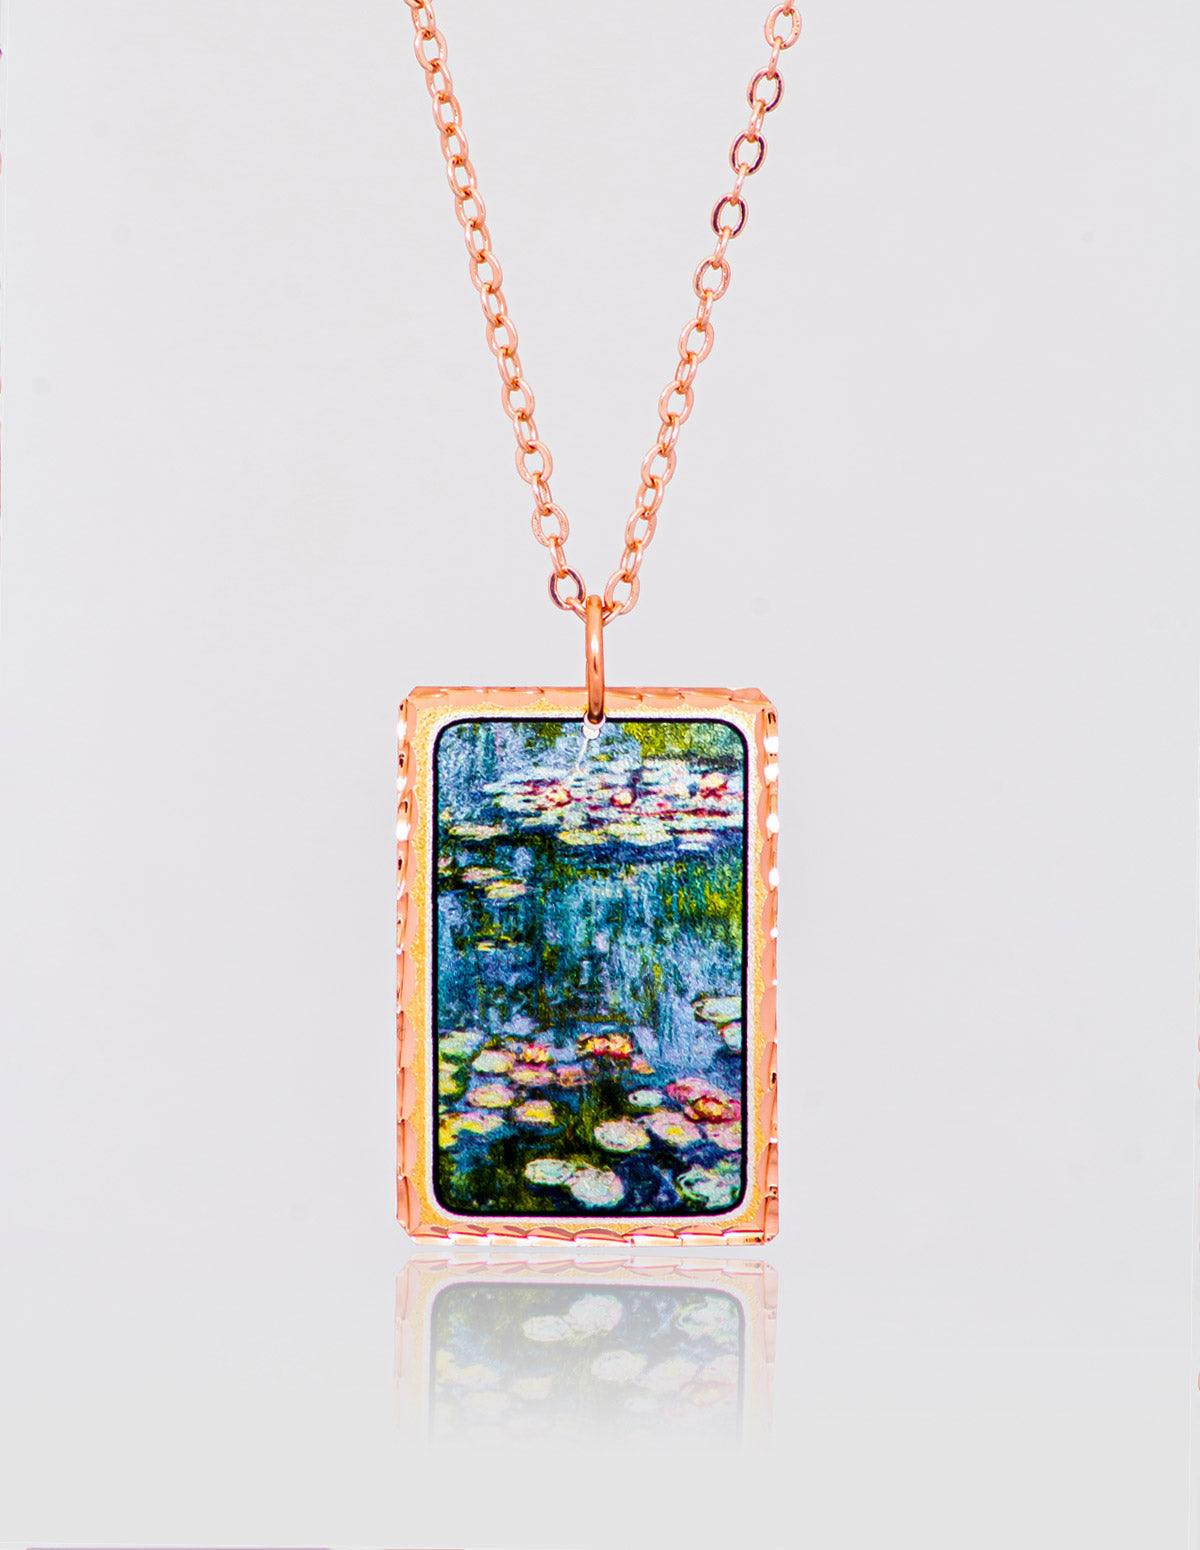 Claude Monet Water Lilies Necklace - artucky-US - claude, claude monet, import_2022_07_19_113509, kolye, monet, tasarım kolye, water lilies